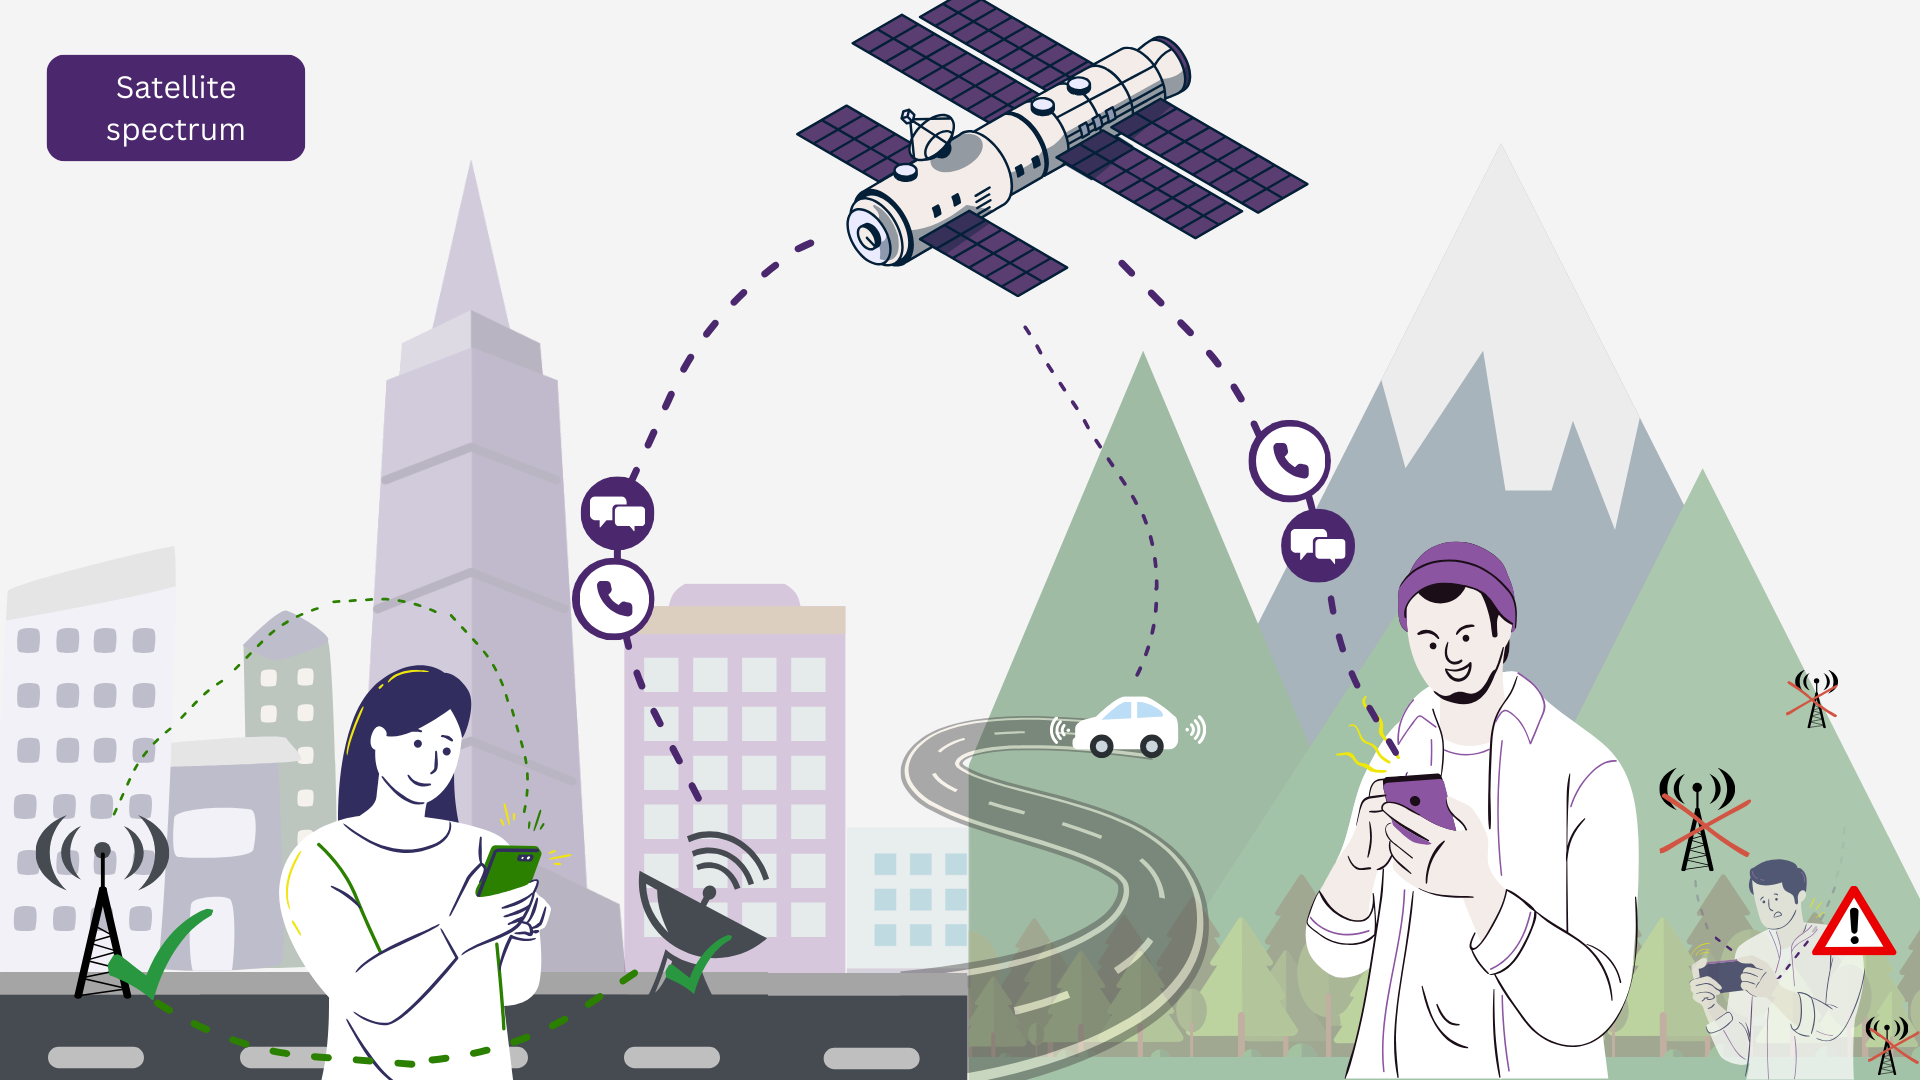 This technology uses dedicated satellite spectrum in areas where there is no traditional mobile coverage to enable two-way texting between smartphones, voice calling and connection to IoT devices.